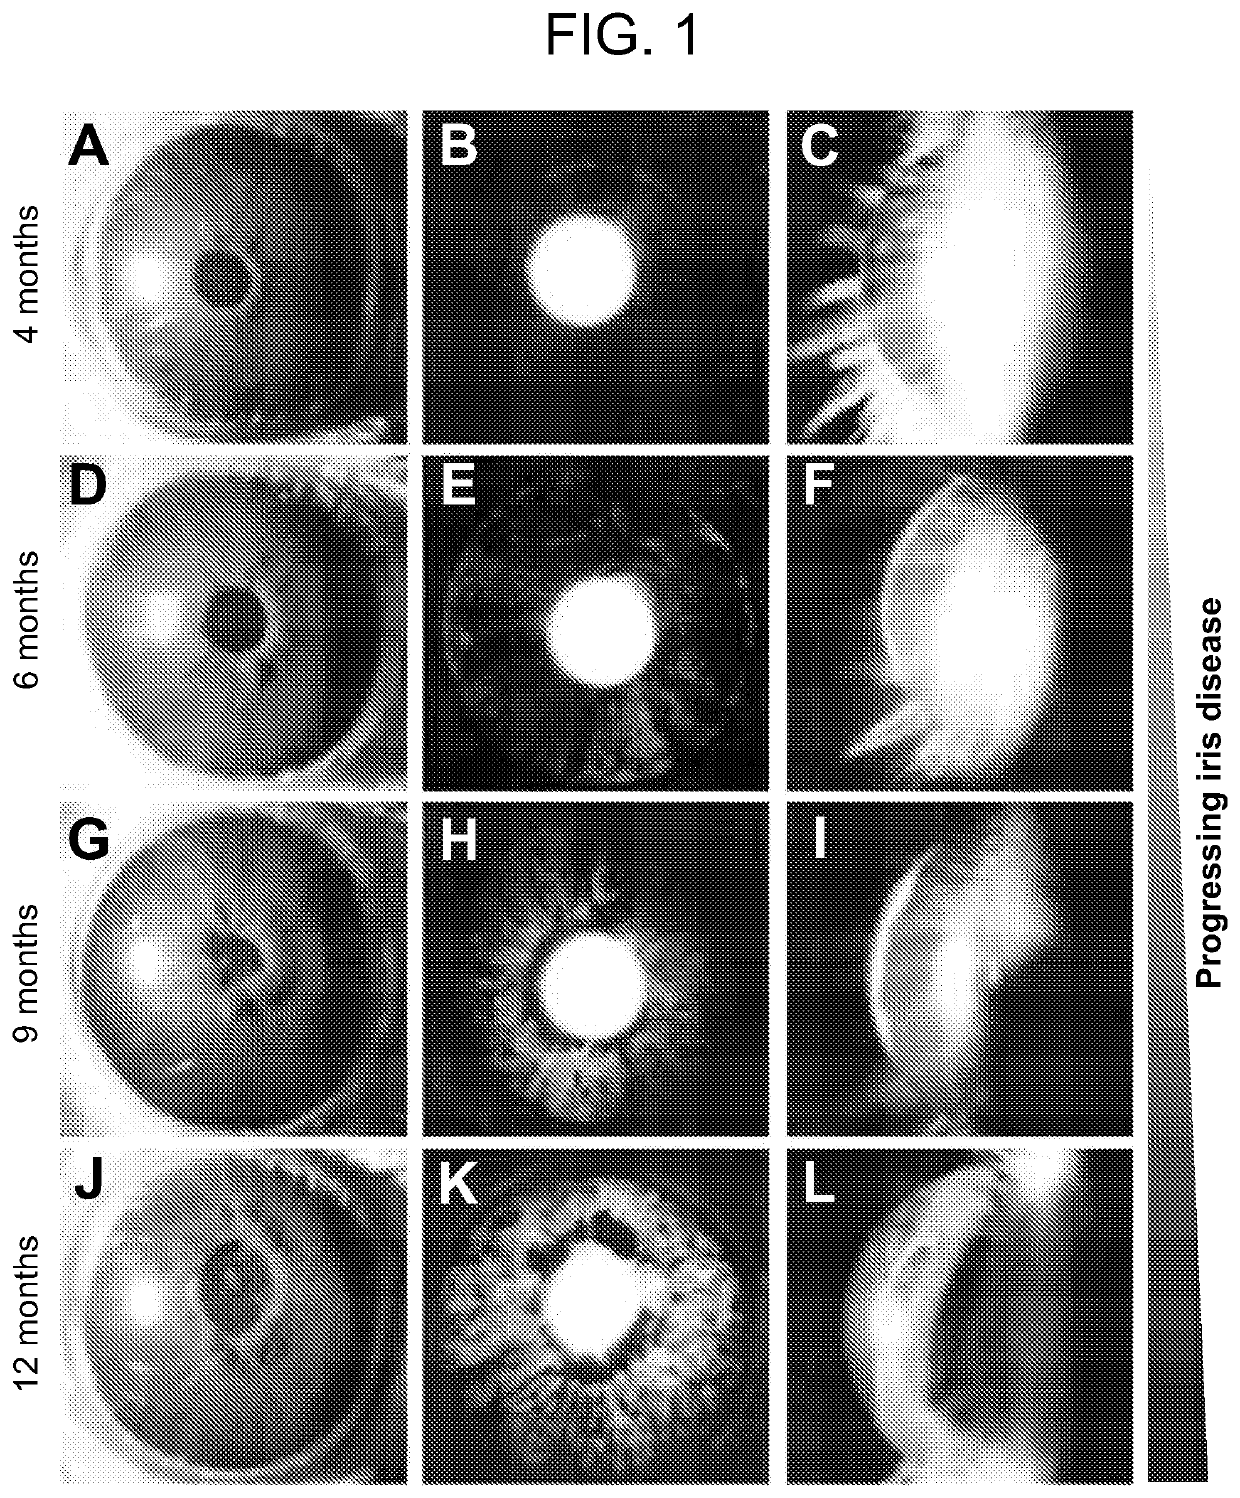 Fat droplets in retina and optic nerve as a diagnostic marker for neurodegeneration and glaucoma in humans